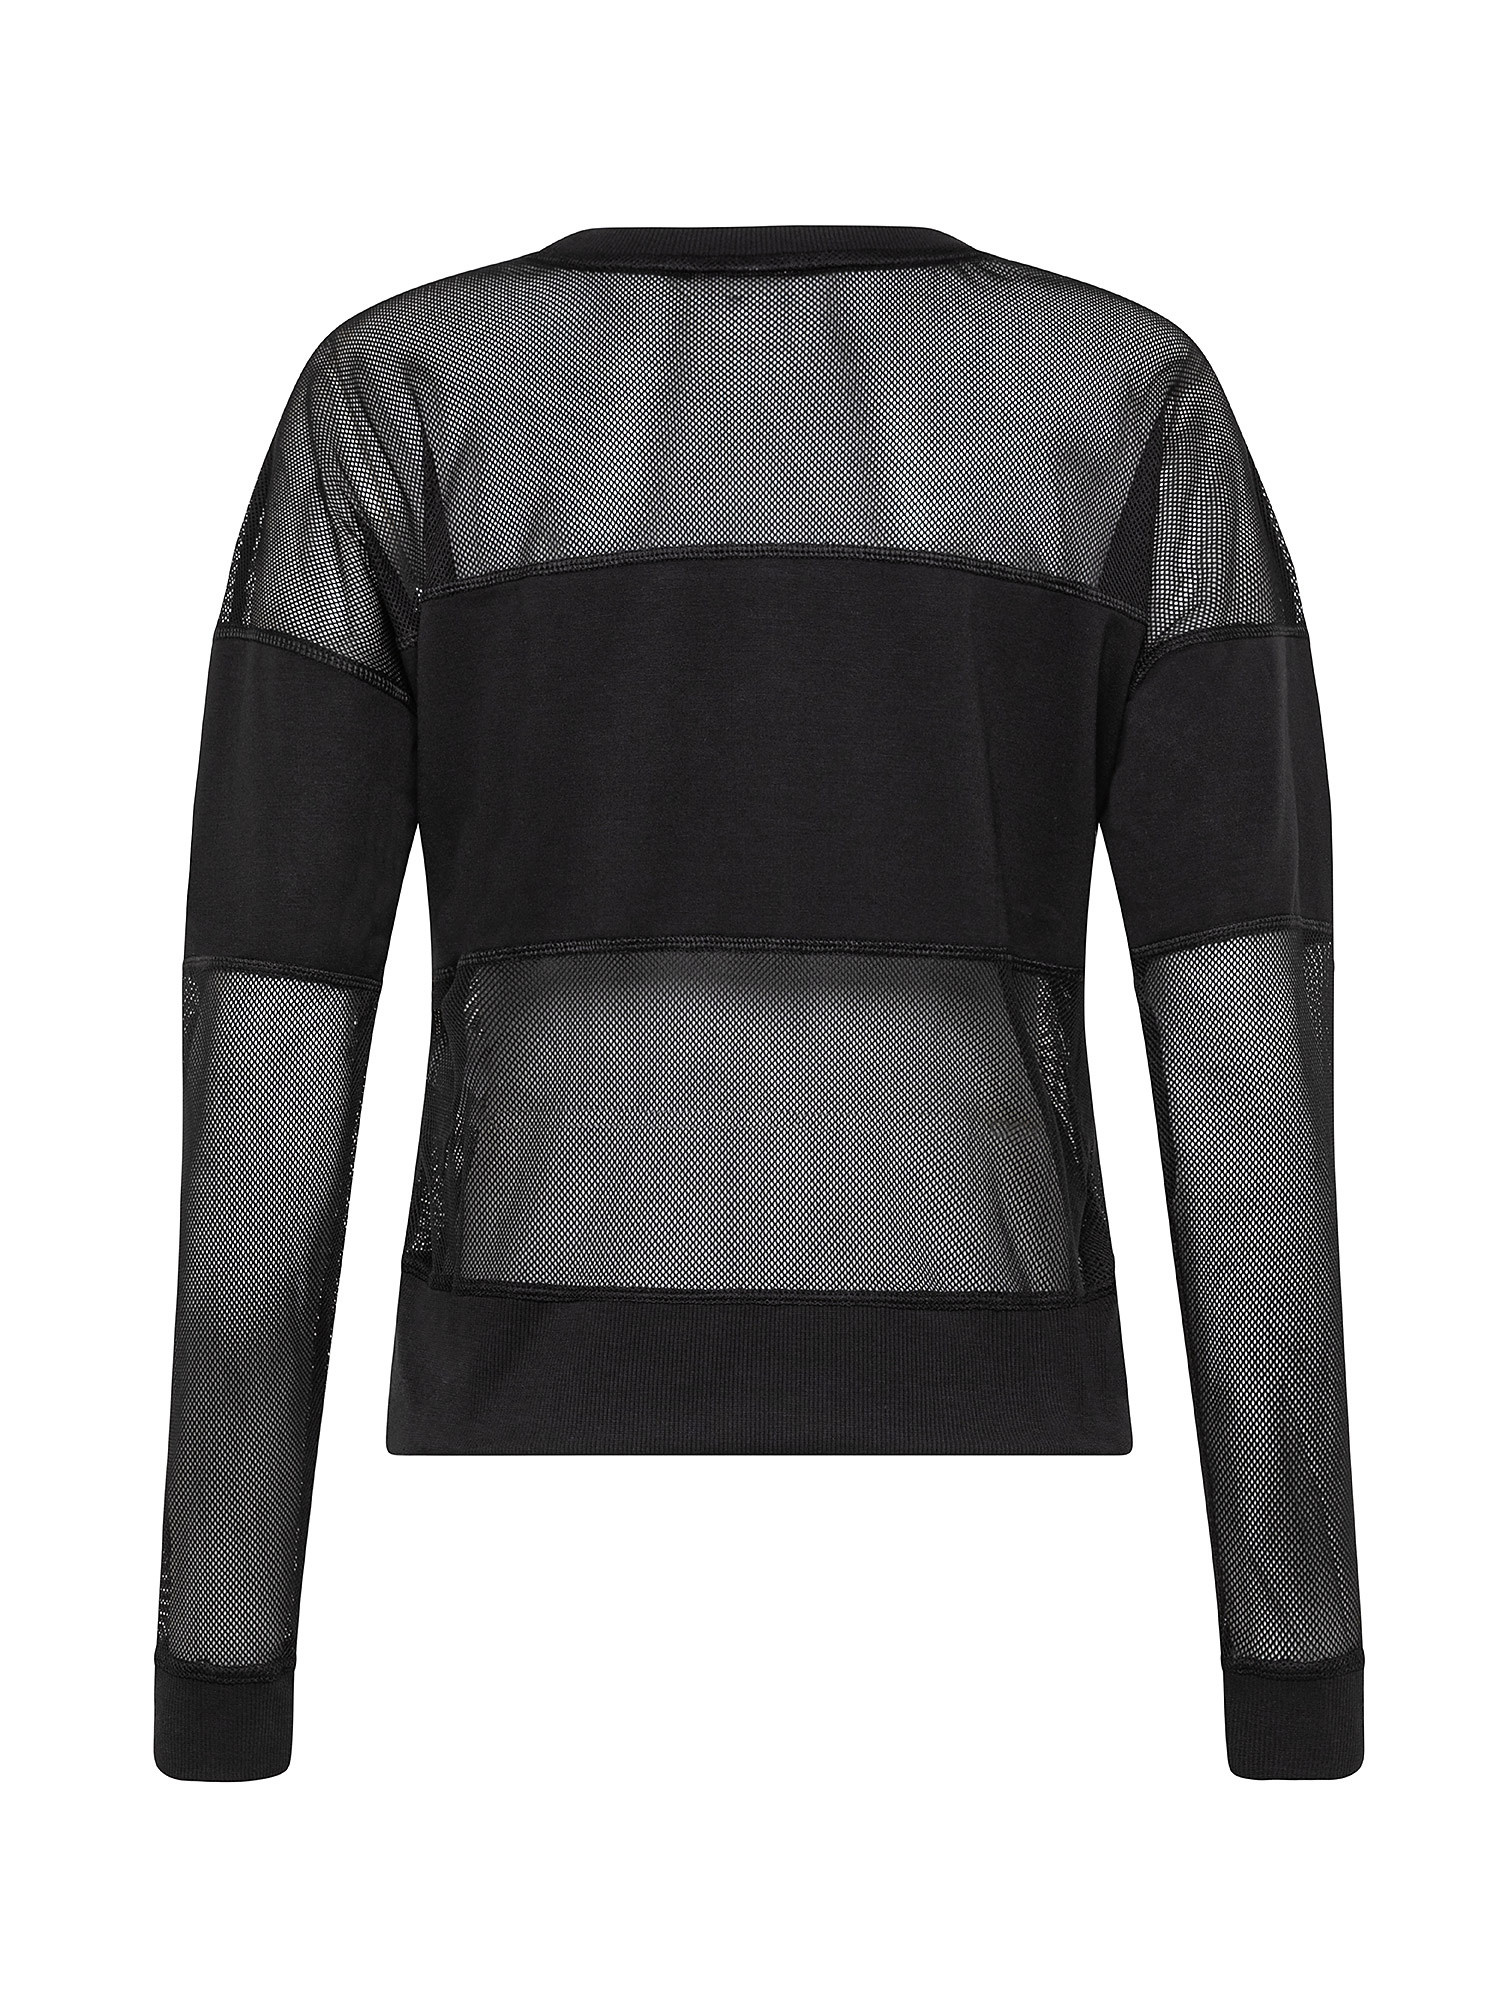 Pullover con maniche lunghe, Nero, large image number 0